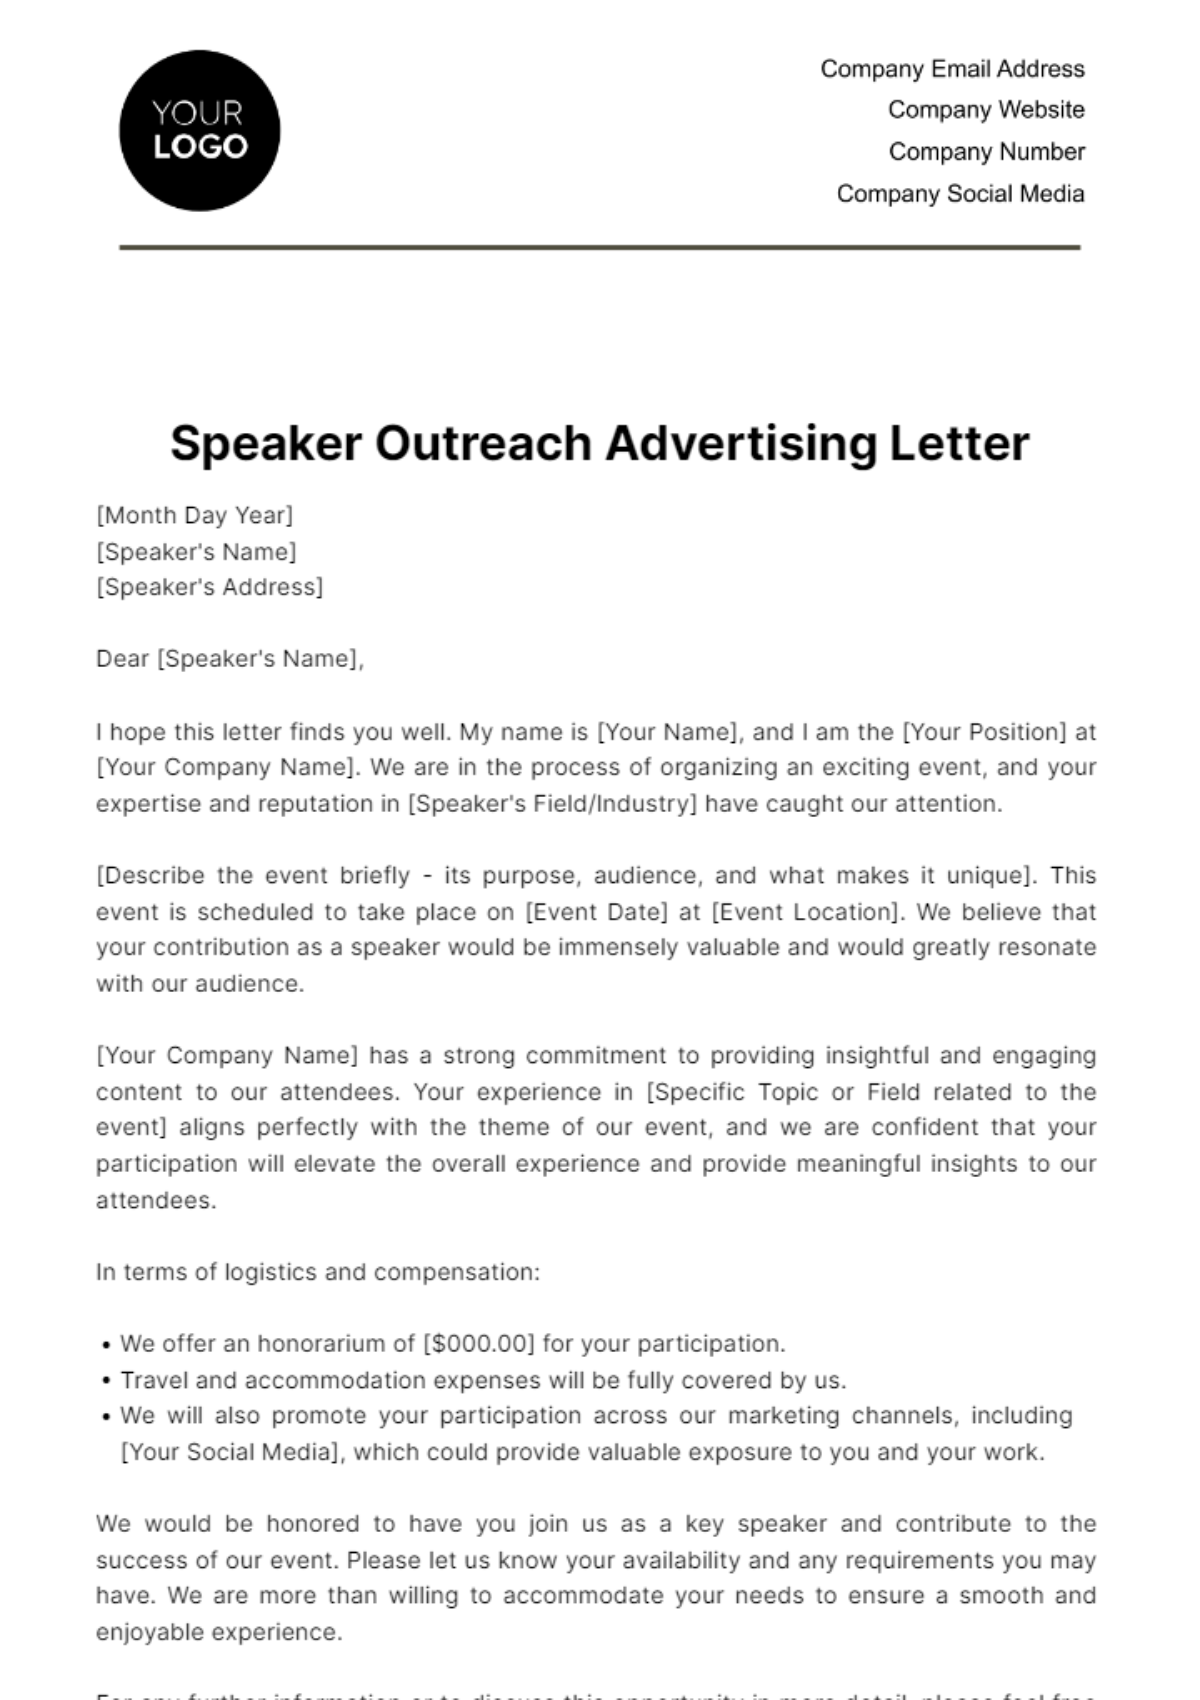 Free Speaker Outreach Advertising Letter Template